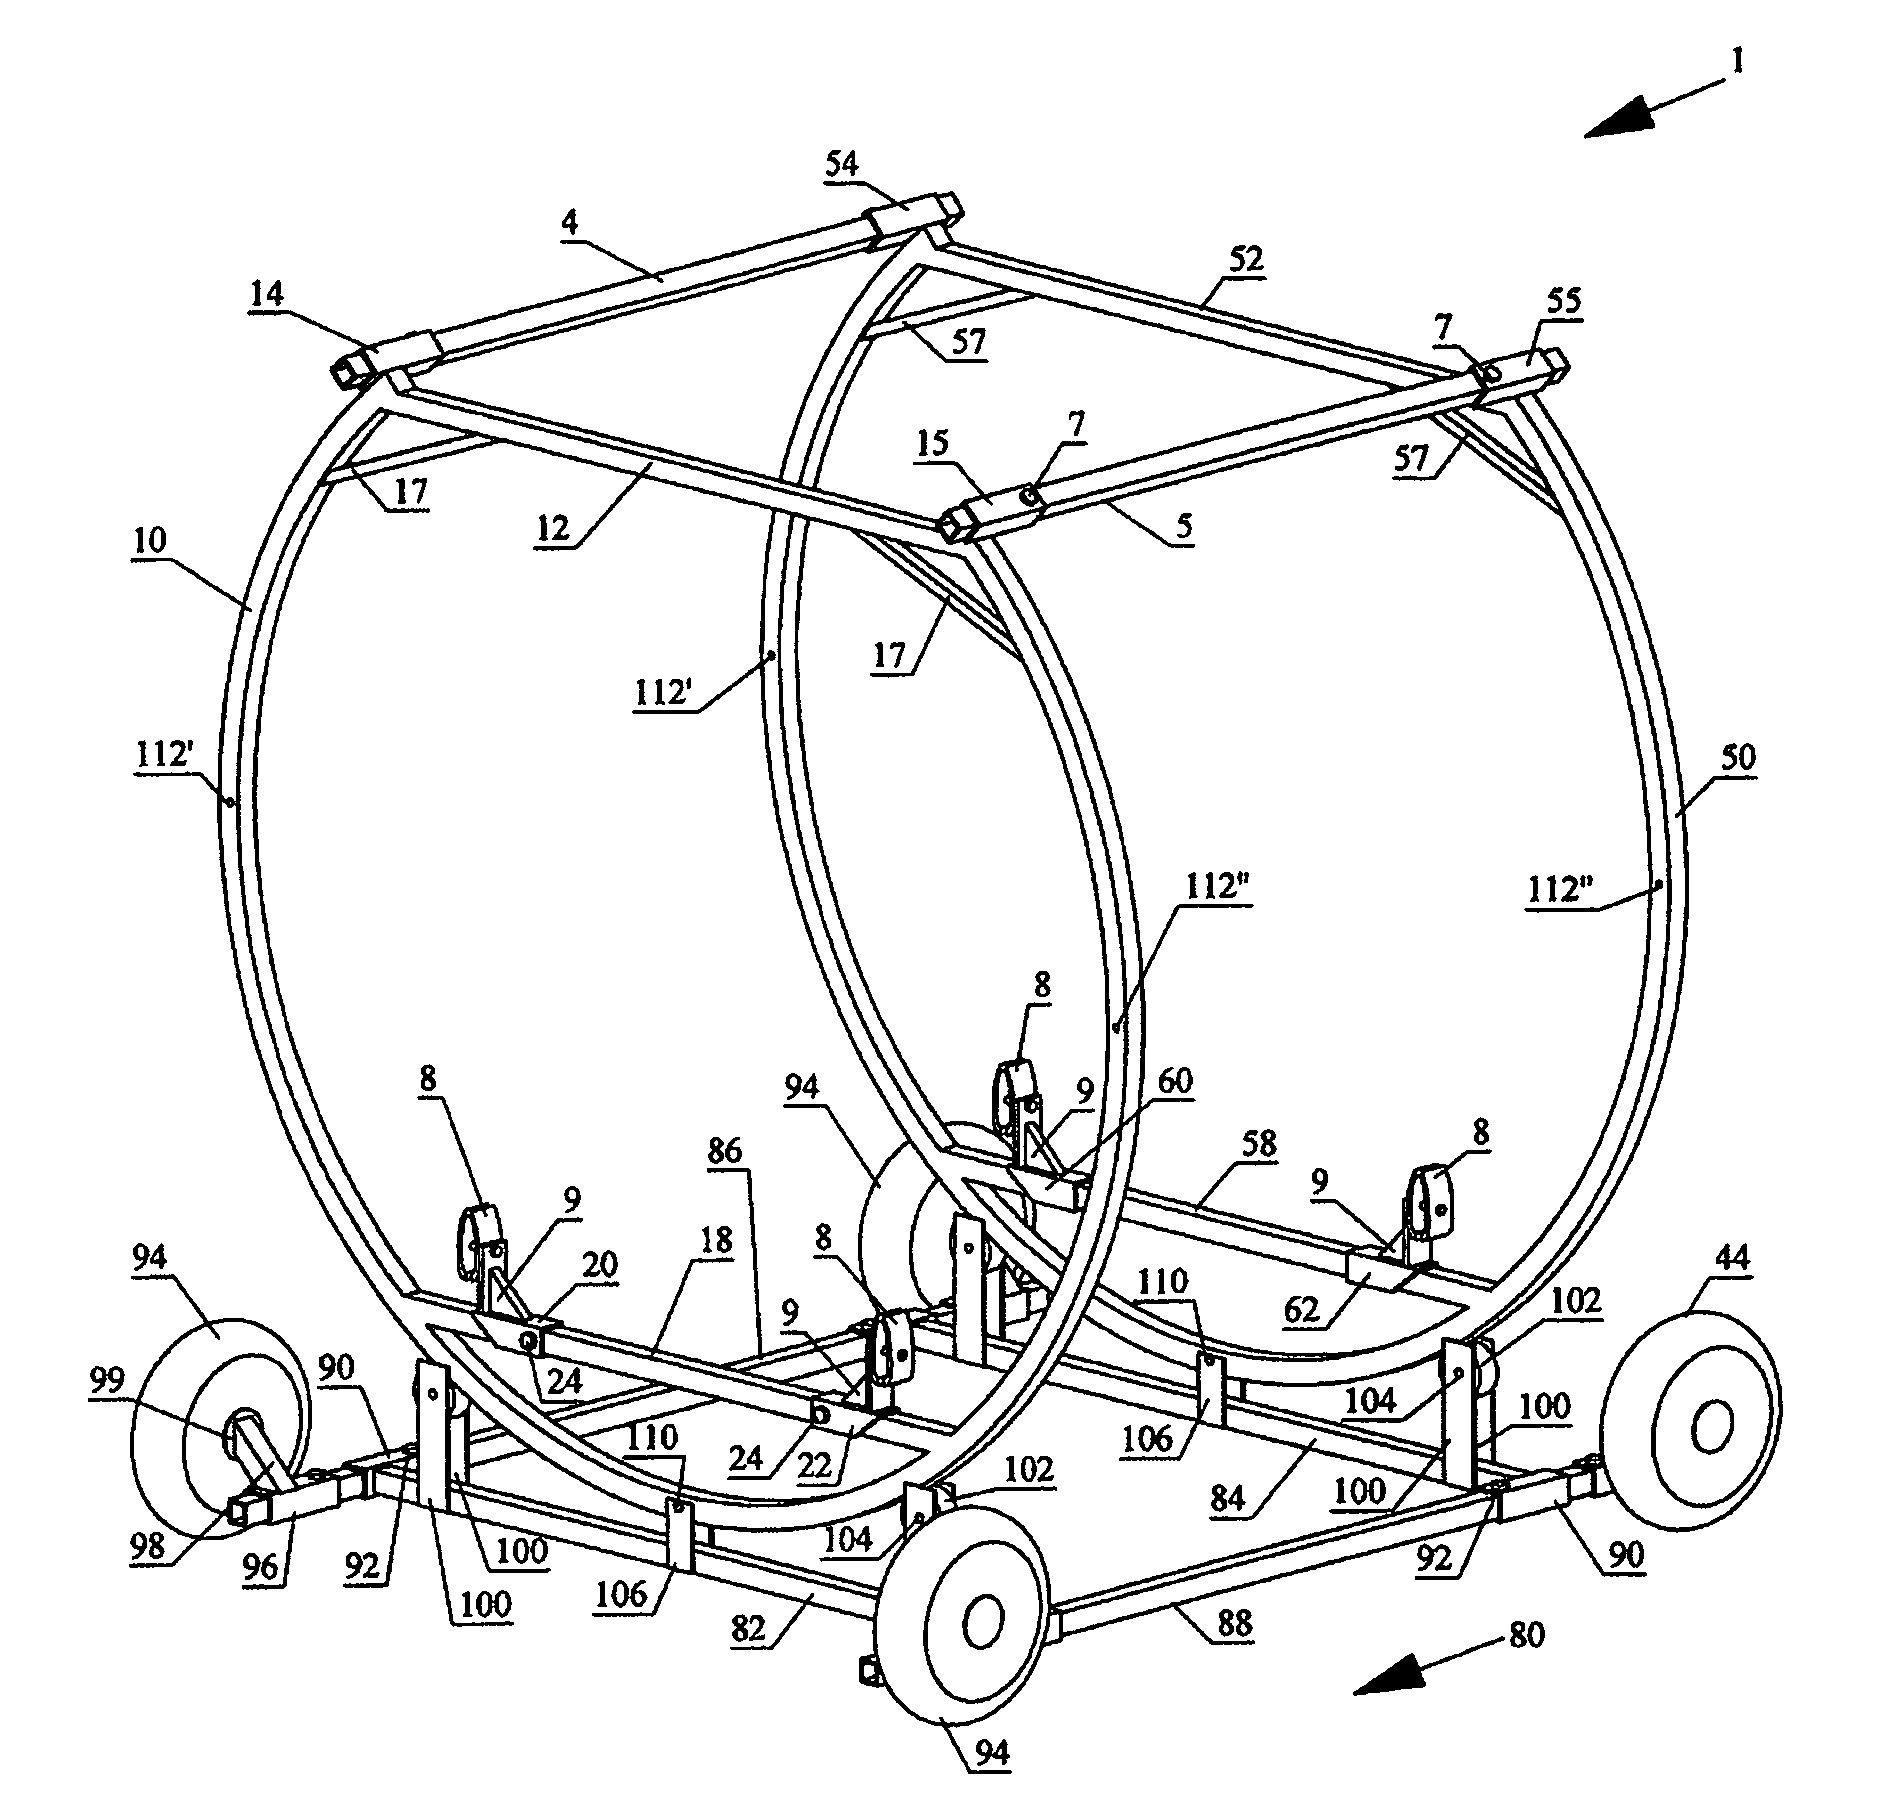 Apparatus for rotating a vehicle